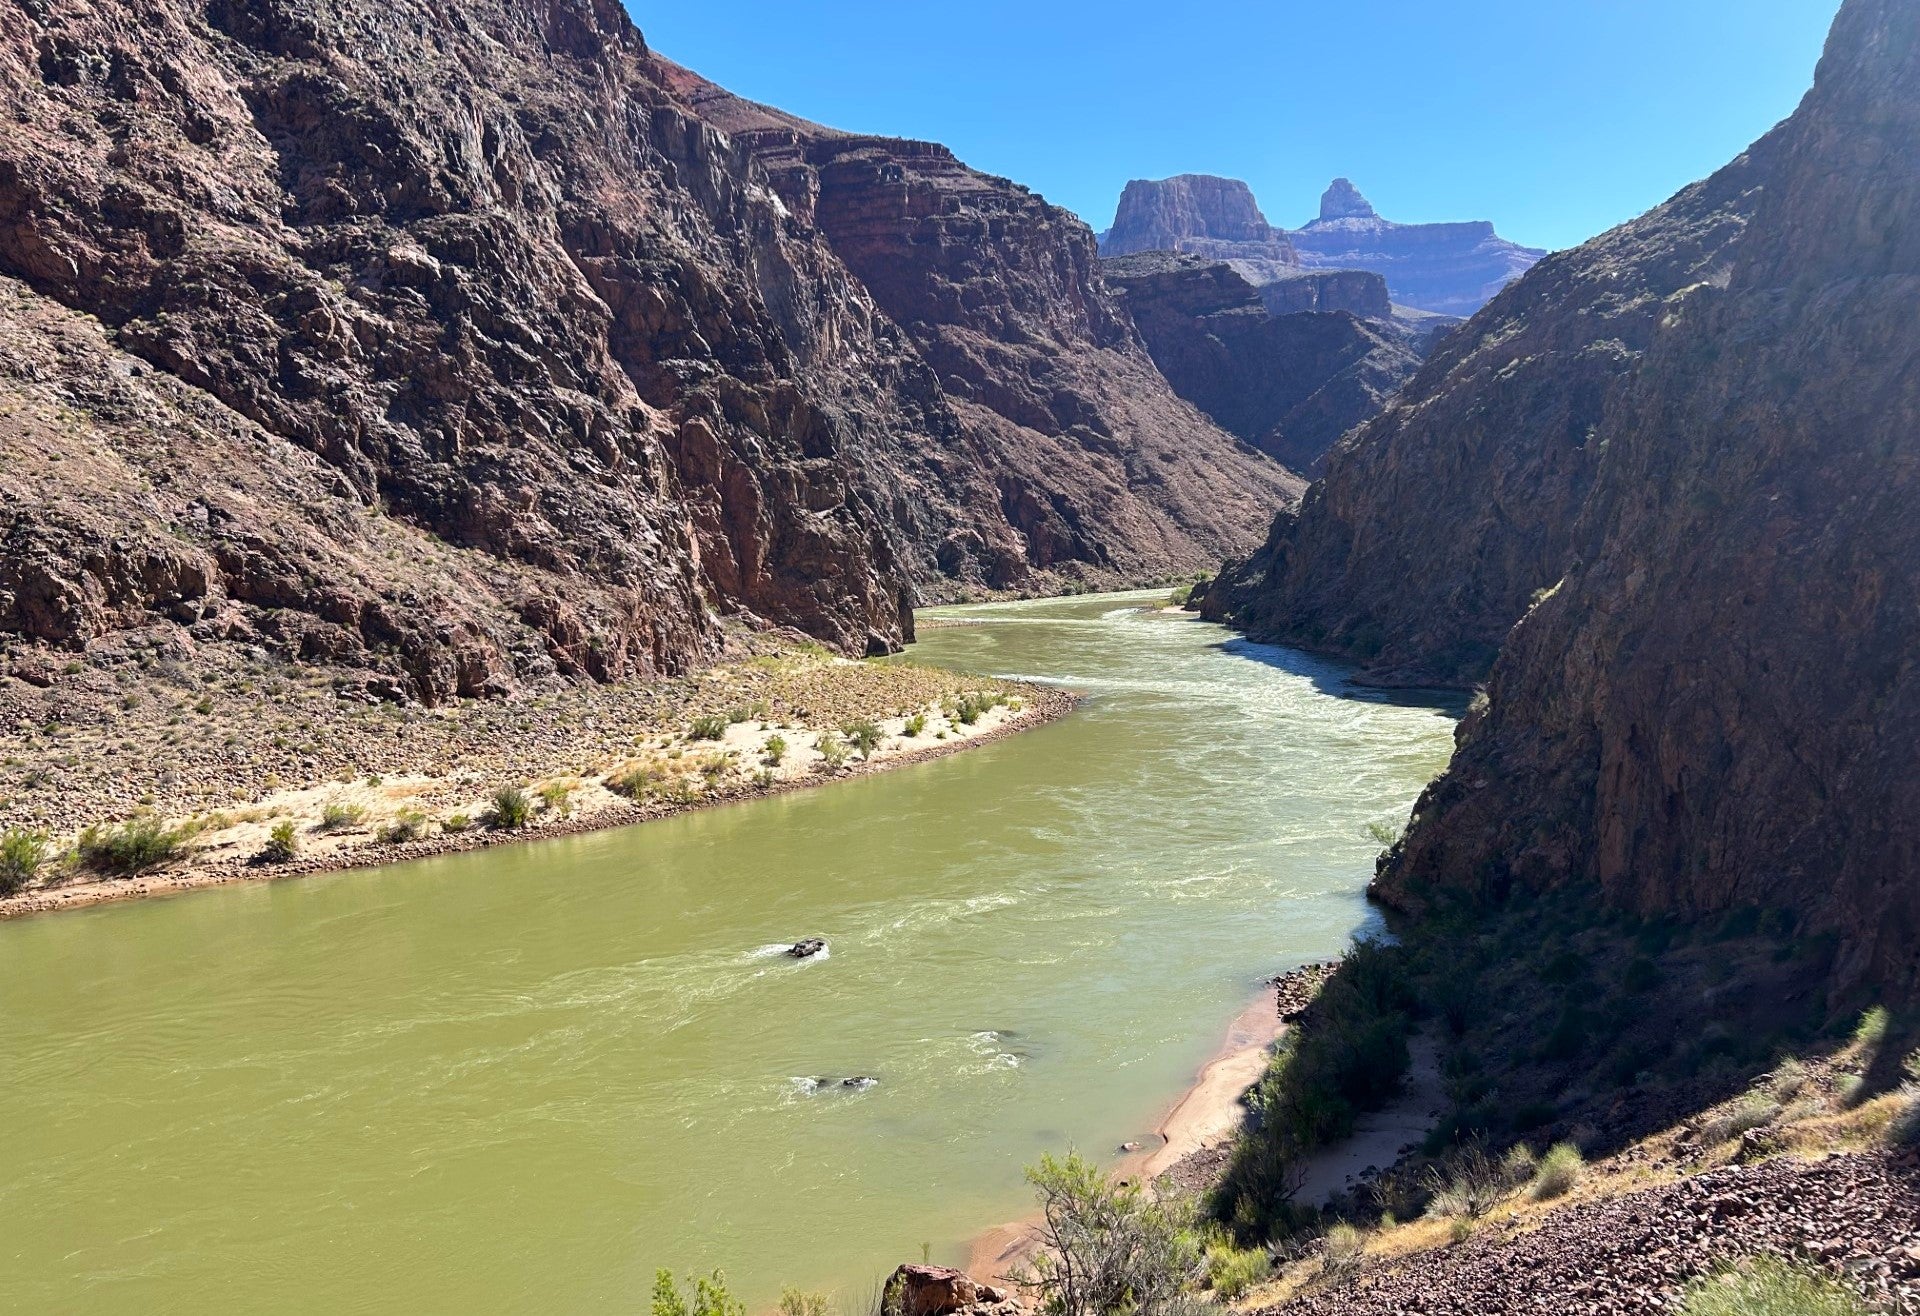 The 41-year-old man was found on the Bright Angel Trail